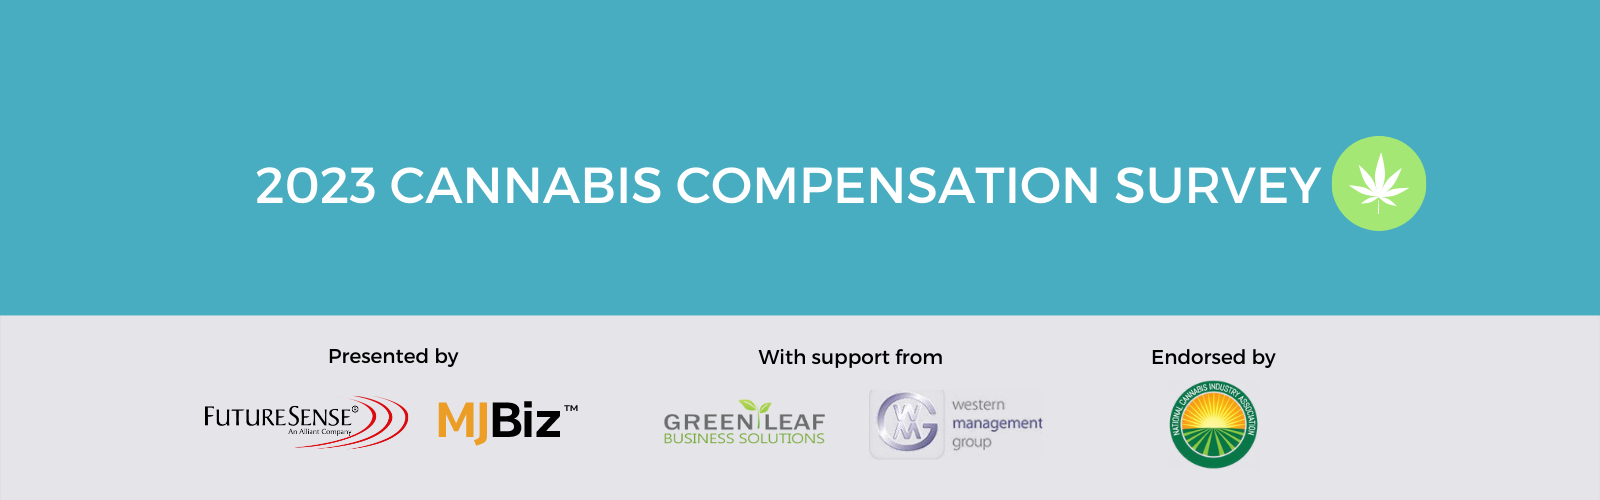 Pages from 2022 Cannabis Compensation Survey Summary Report (3).pdf (LinkedIn Post) (560 × 187 px) (1600 × 800 px) (1600 × 600 px) (1600 × 500 px)